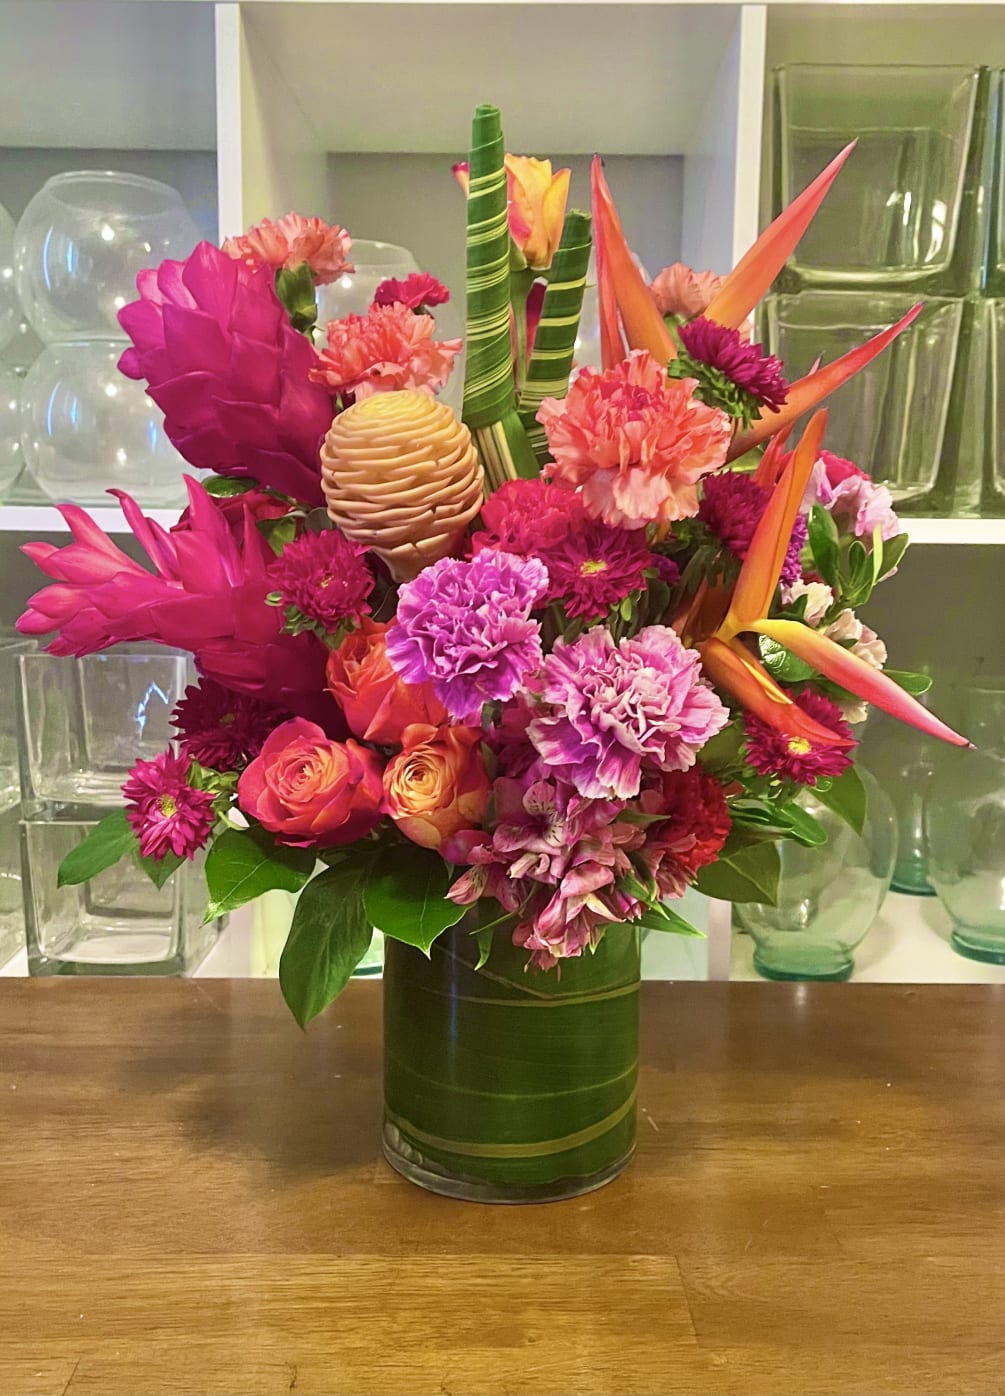 A beautiful warm arrangement filled with fresh cut roses, tropical flowers and